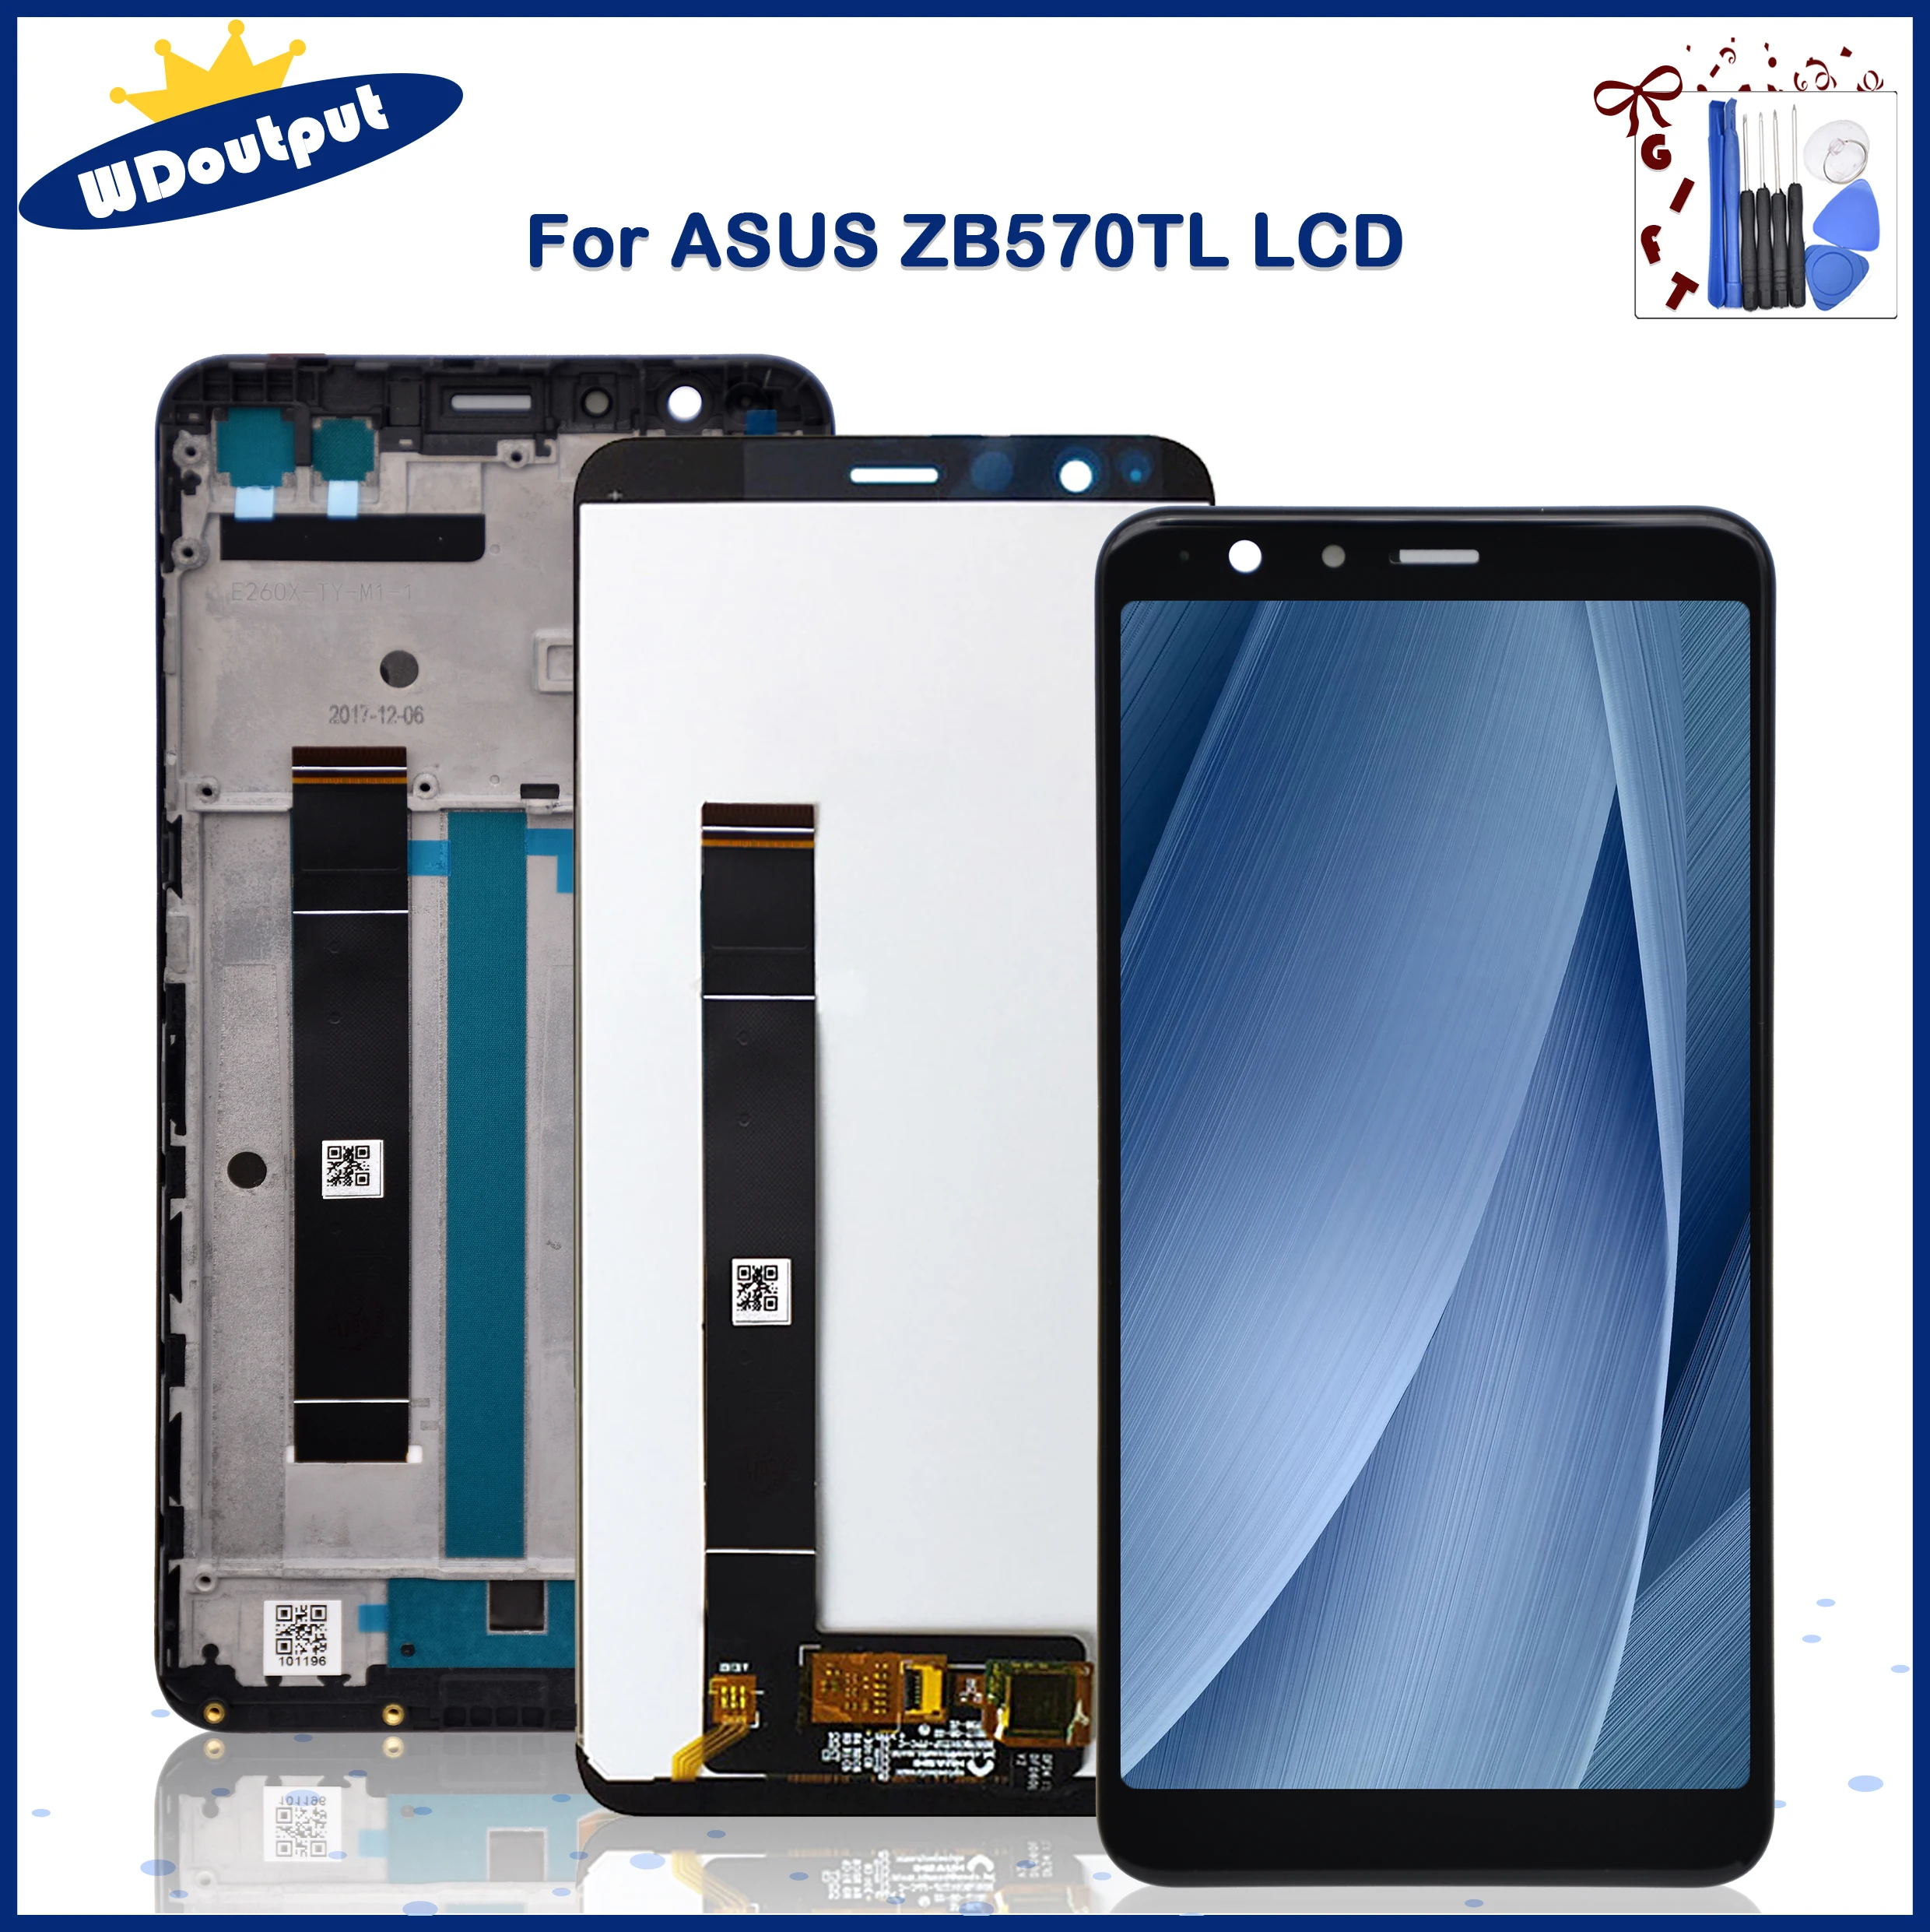 

For ASUS ZenFone Max Plus M1 ZB570TL X018DC X018D LCD Display Touch Screen Digitizer Sensor Assembly Replacement For ZB570TL lcd